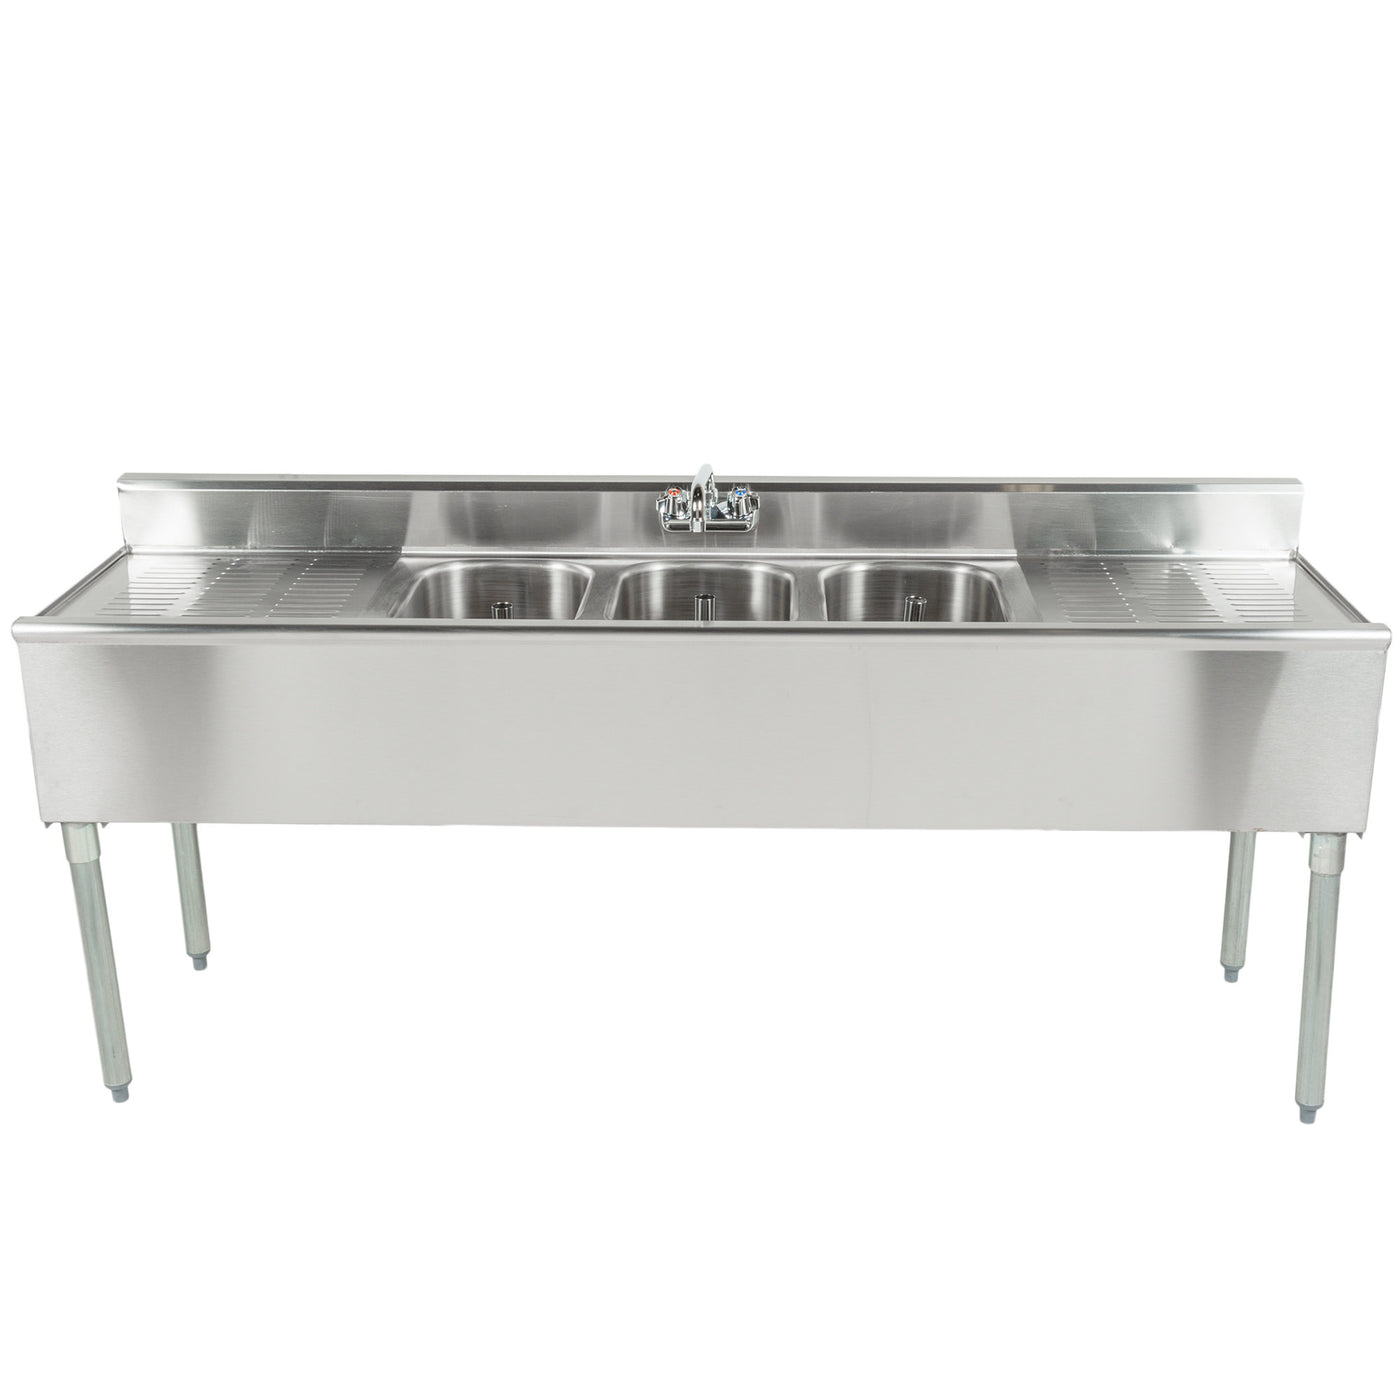 Eagle Group B6c 18 72 Underbar Sink Units 1800 Series Three Compartment 304 Stainless Steel Drainboards On Left Right 4 5 H Backsplash